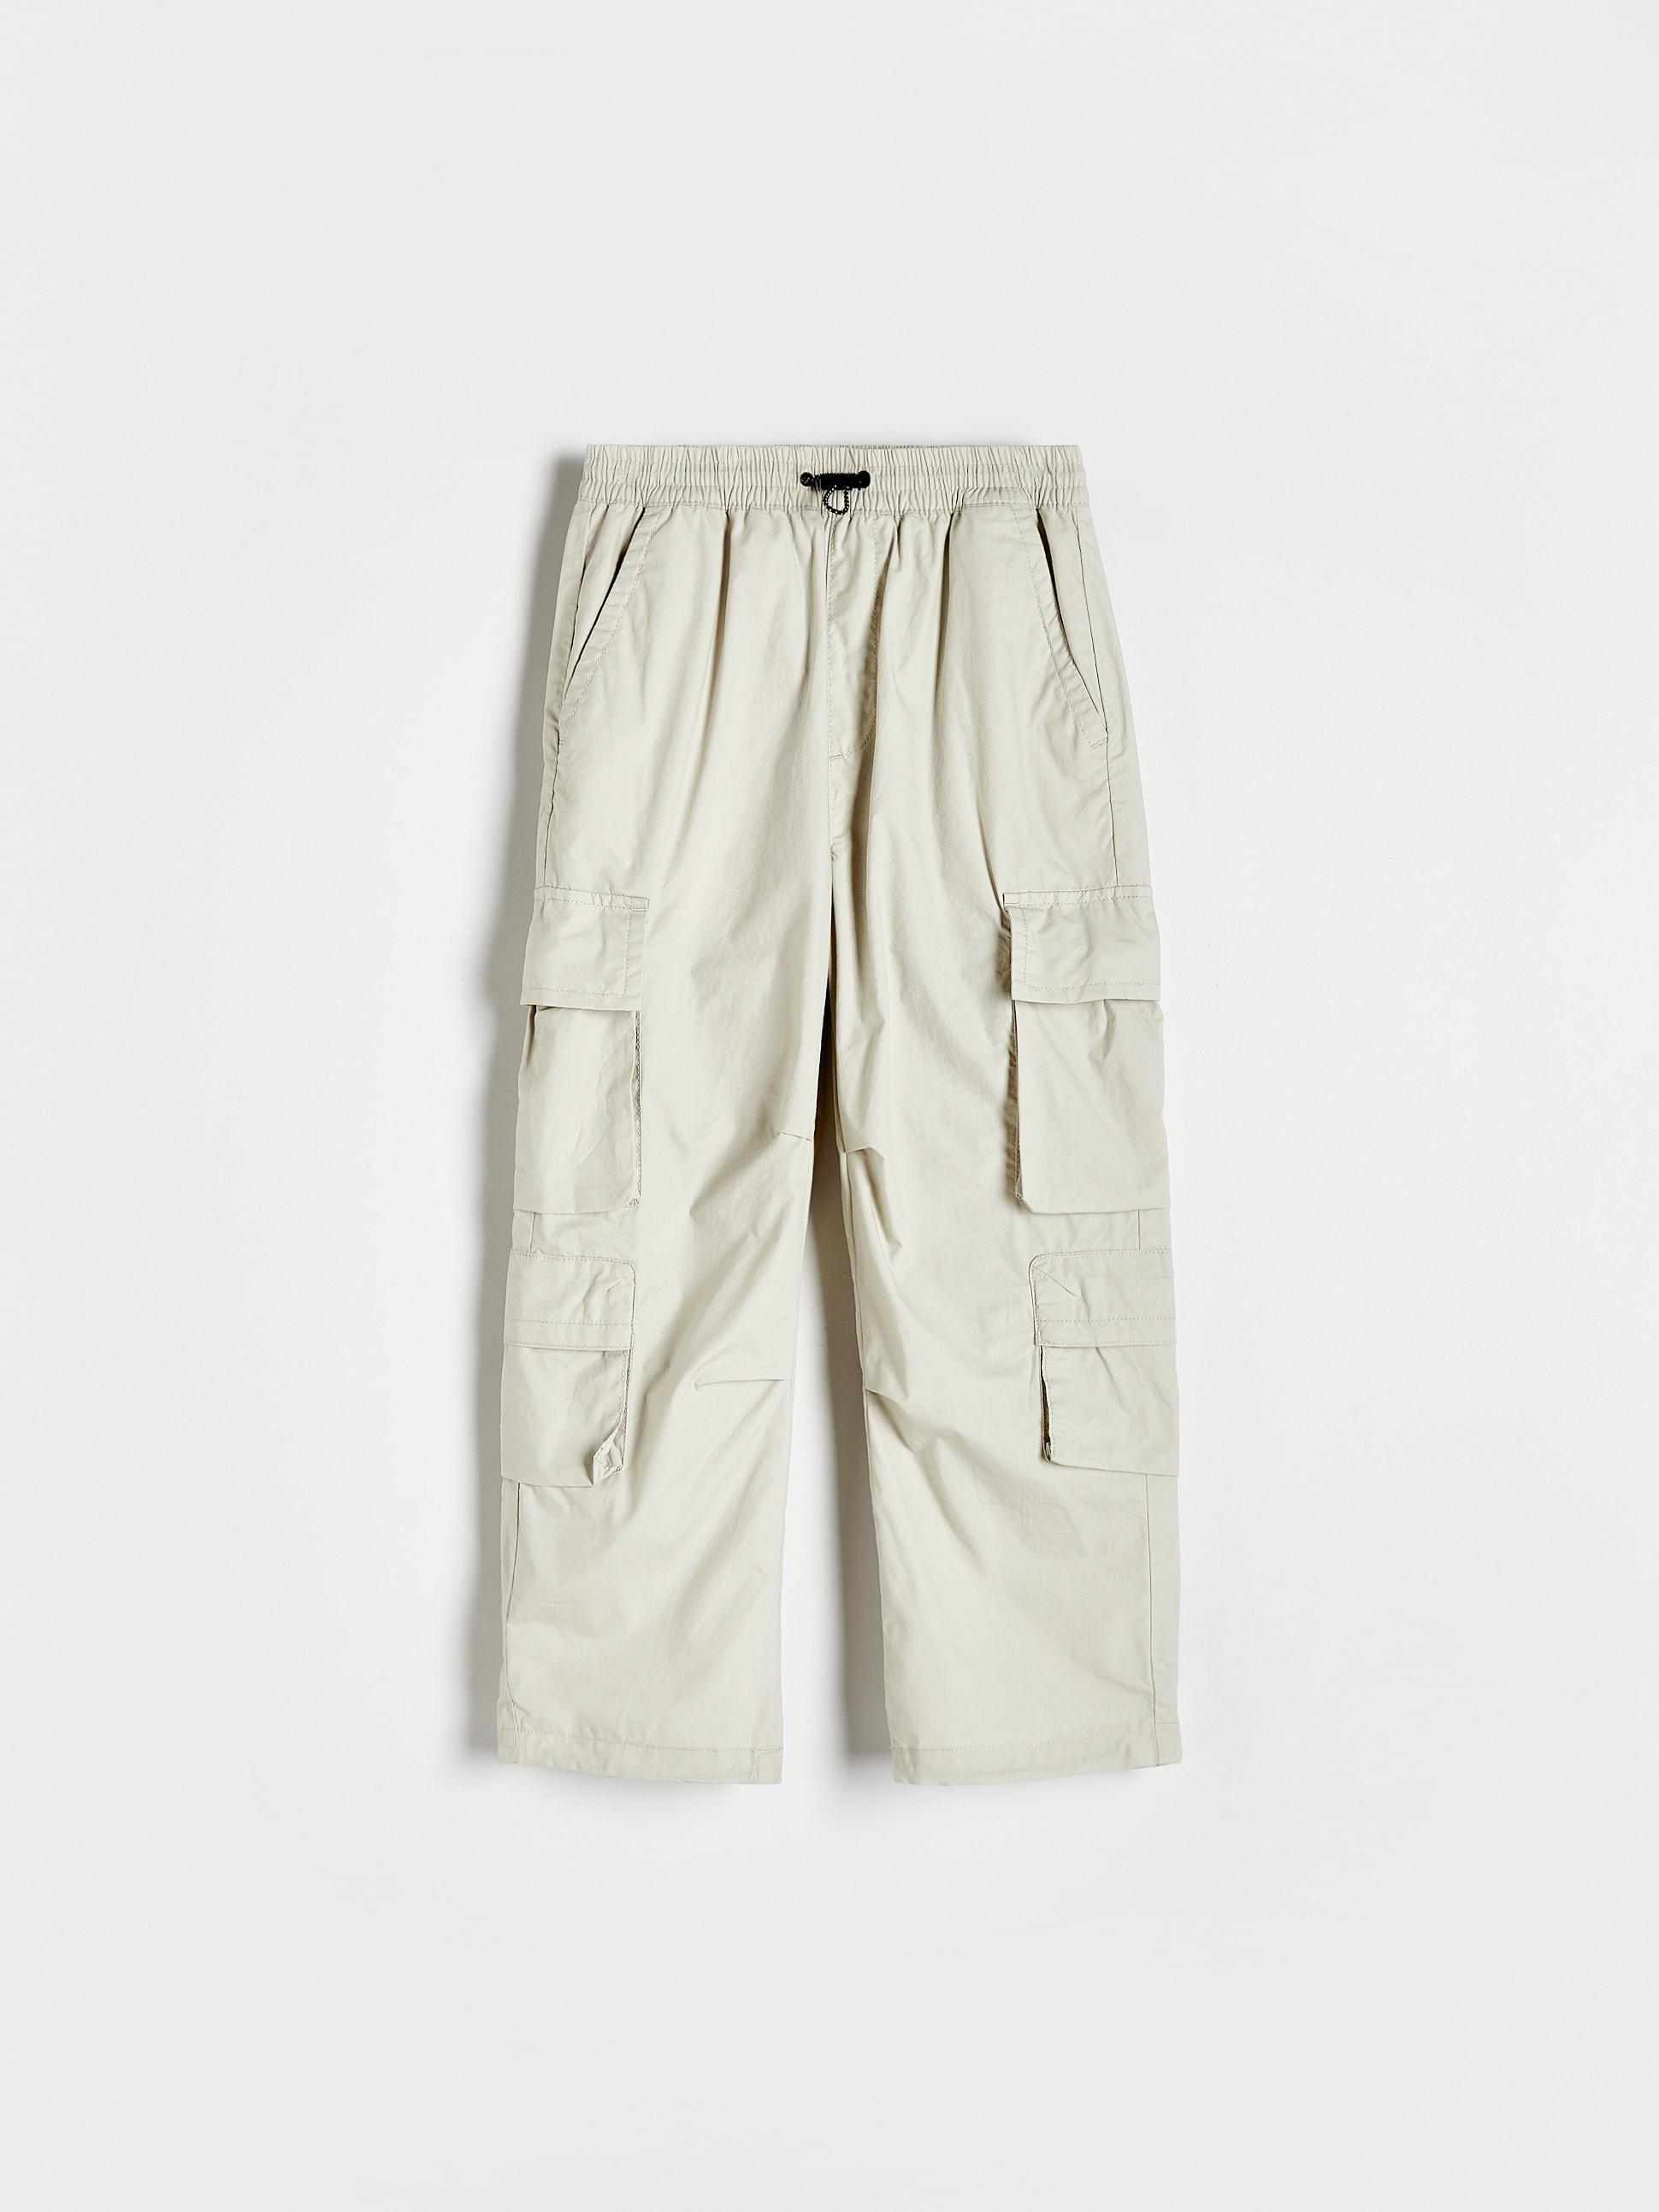 Reserved - Beige Cargo Trousers, Kids Boys